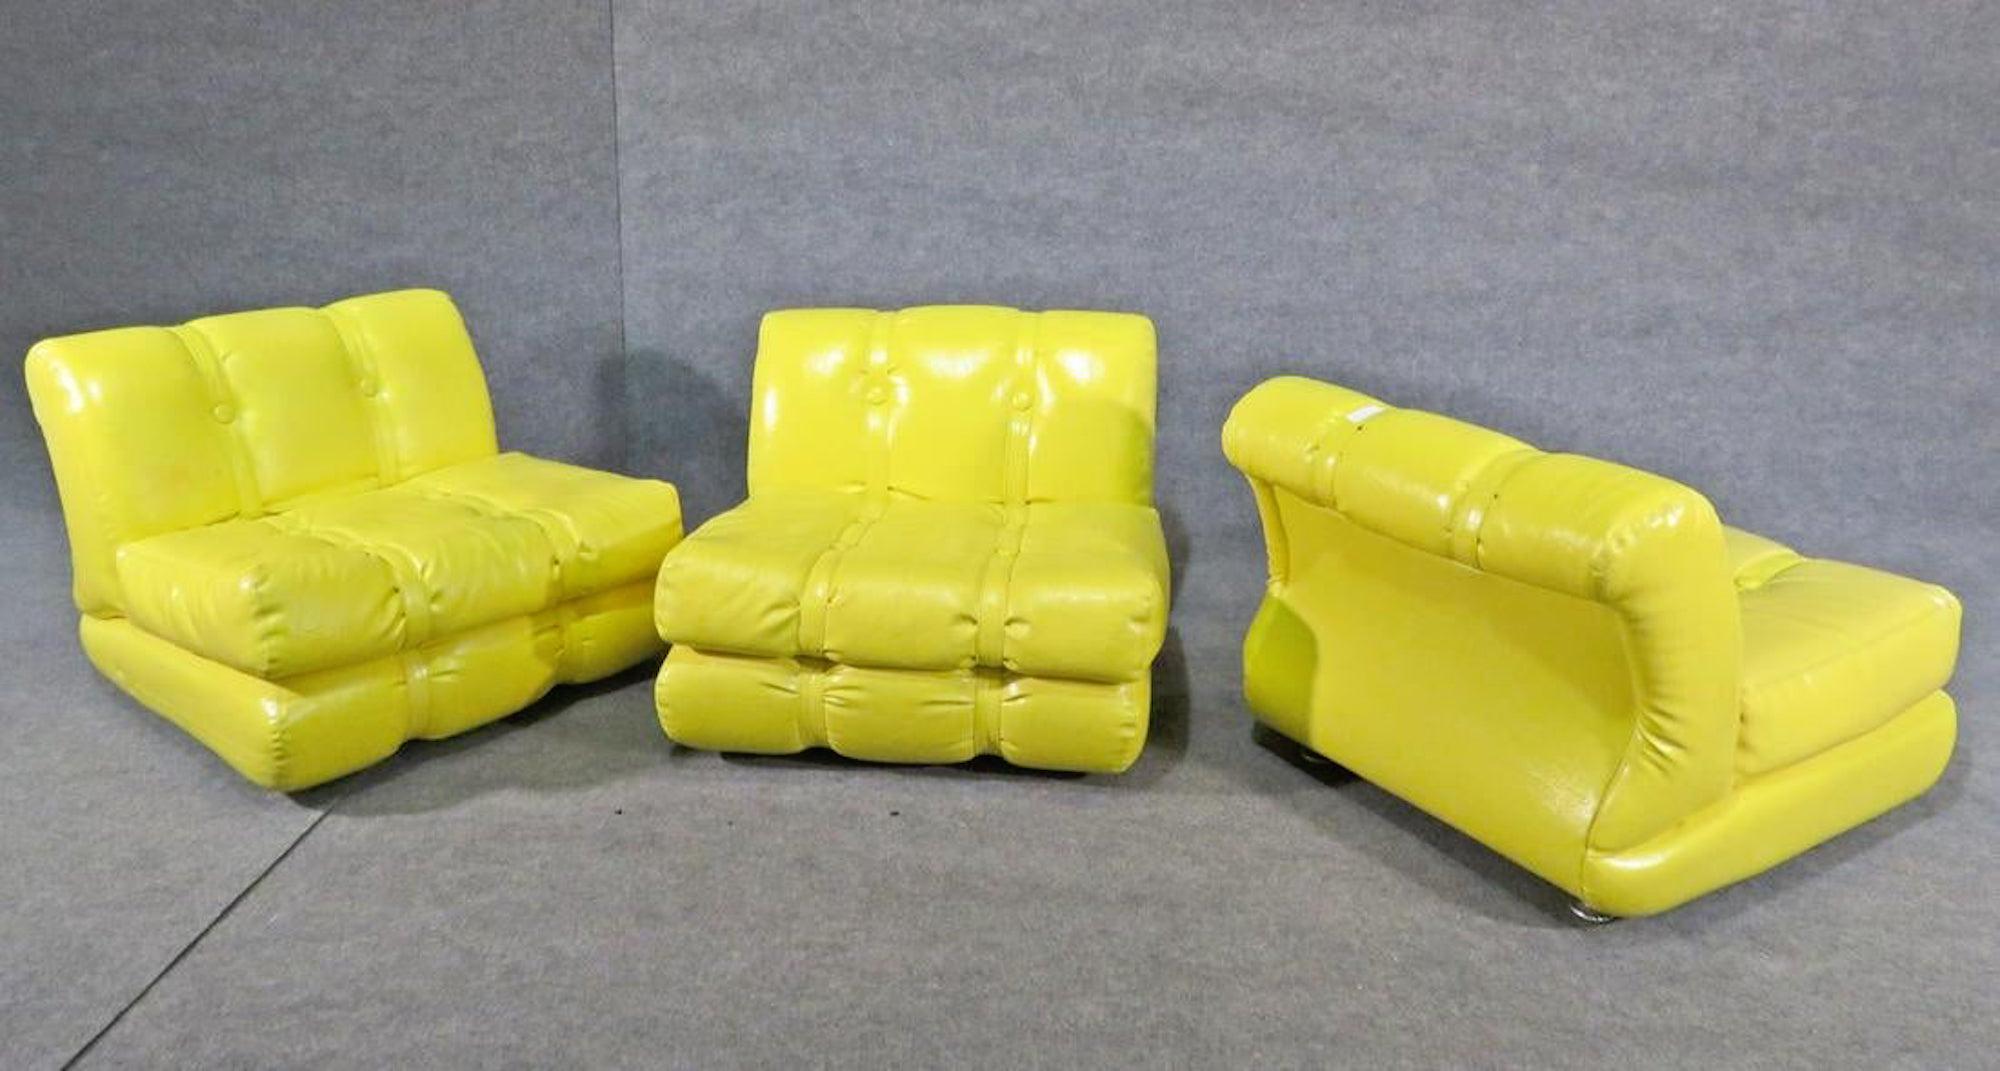 Three piece sofa in vibrant yellow vinyl.

Please confirm item location with dealer (NJ or NY).